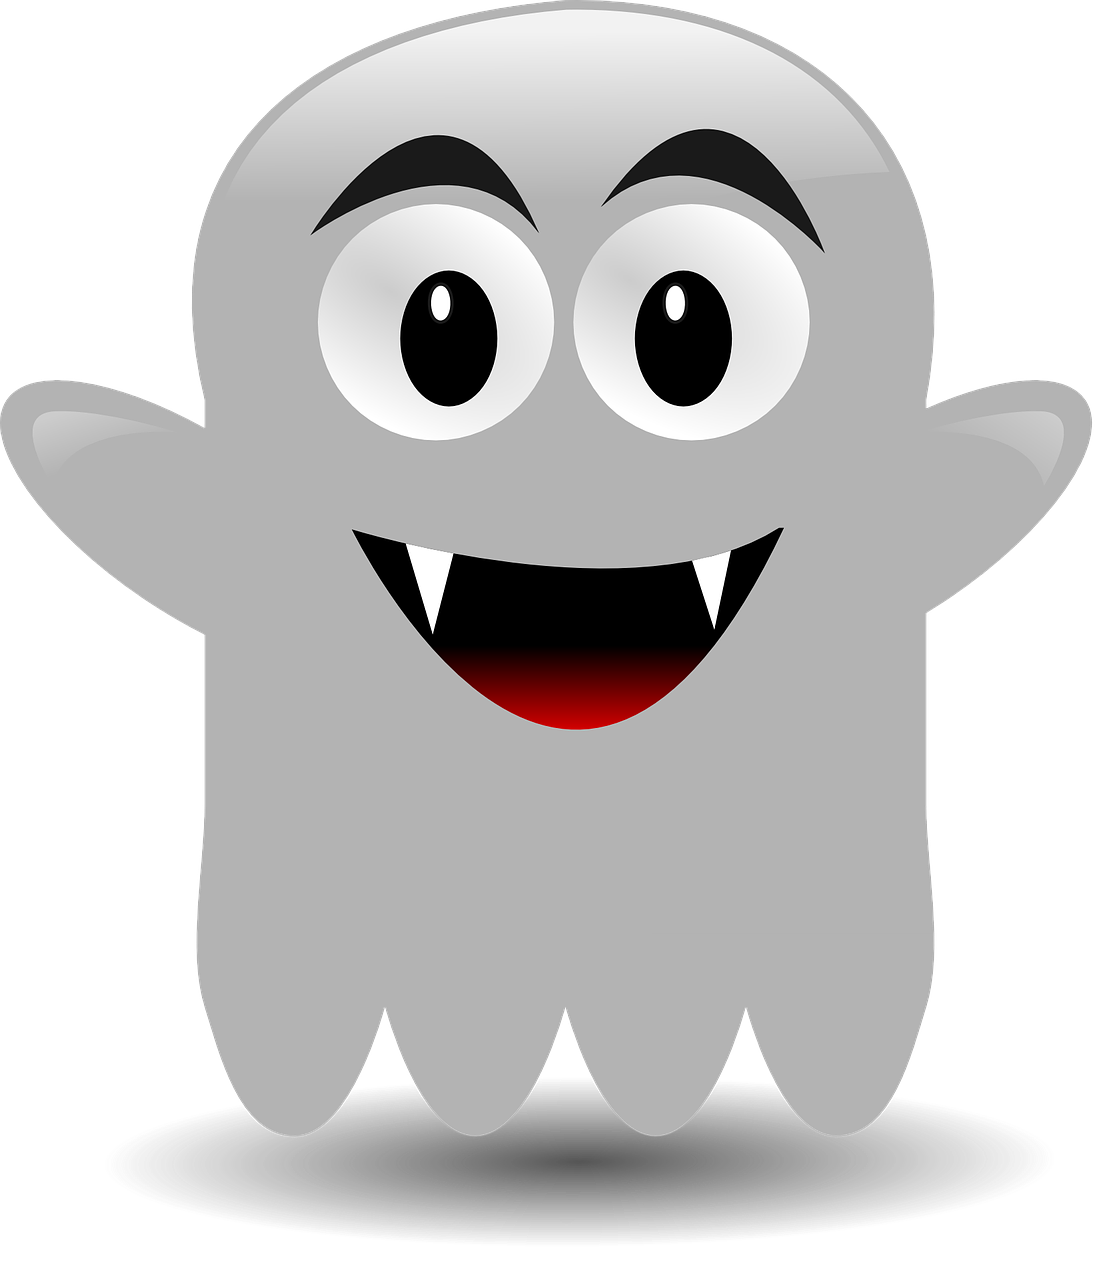 a cartoon ghost with a big smile on it's face, a cartoon, pixabay, mingei, gray anthropomorphic, sharp vampire teeth, googly eyes, high - res